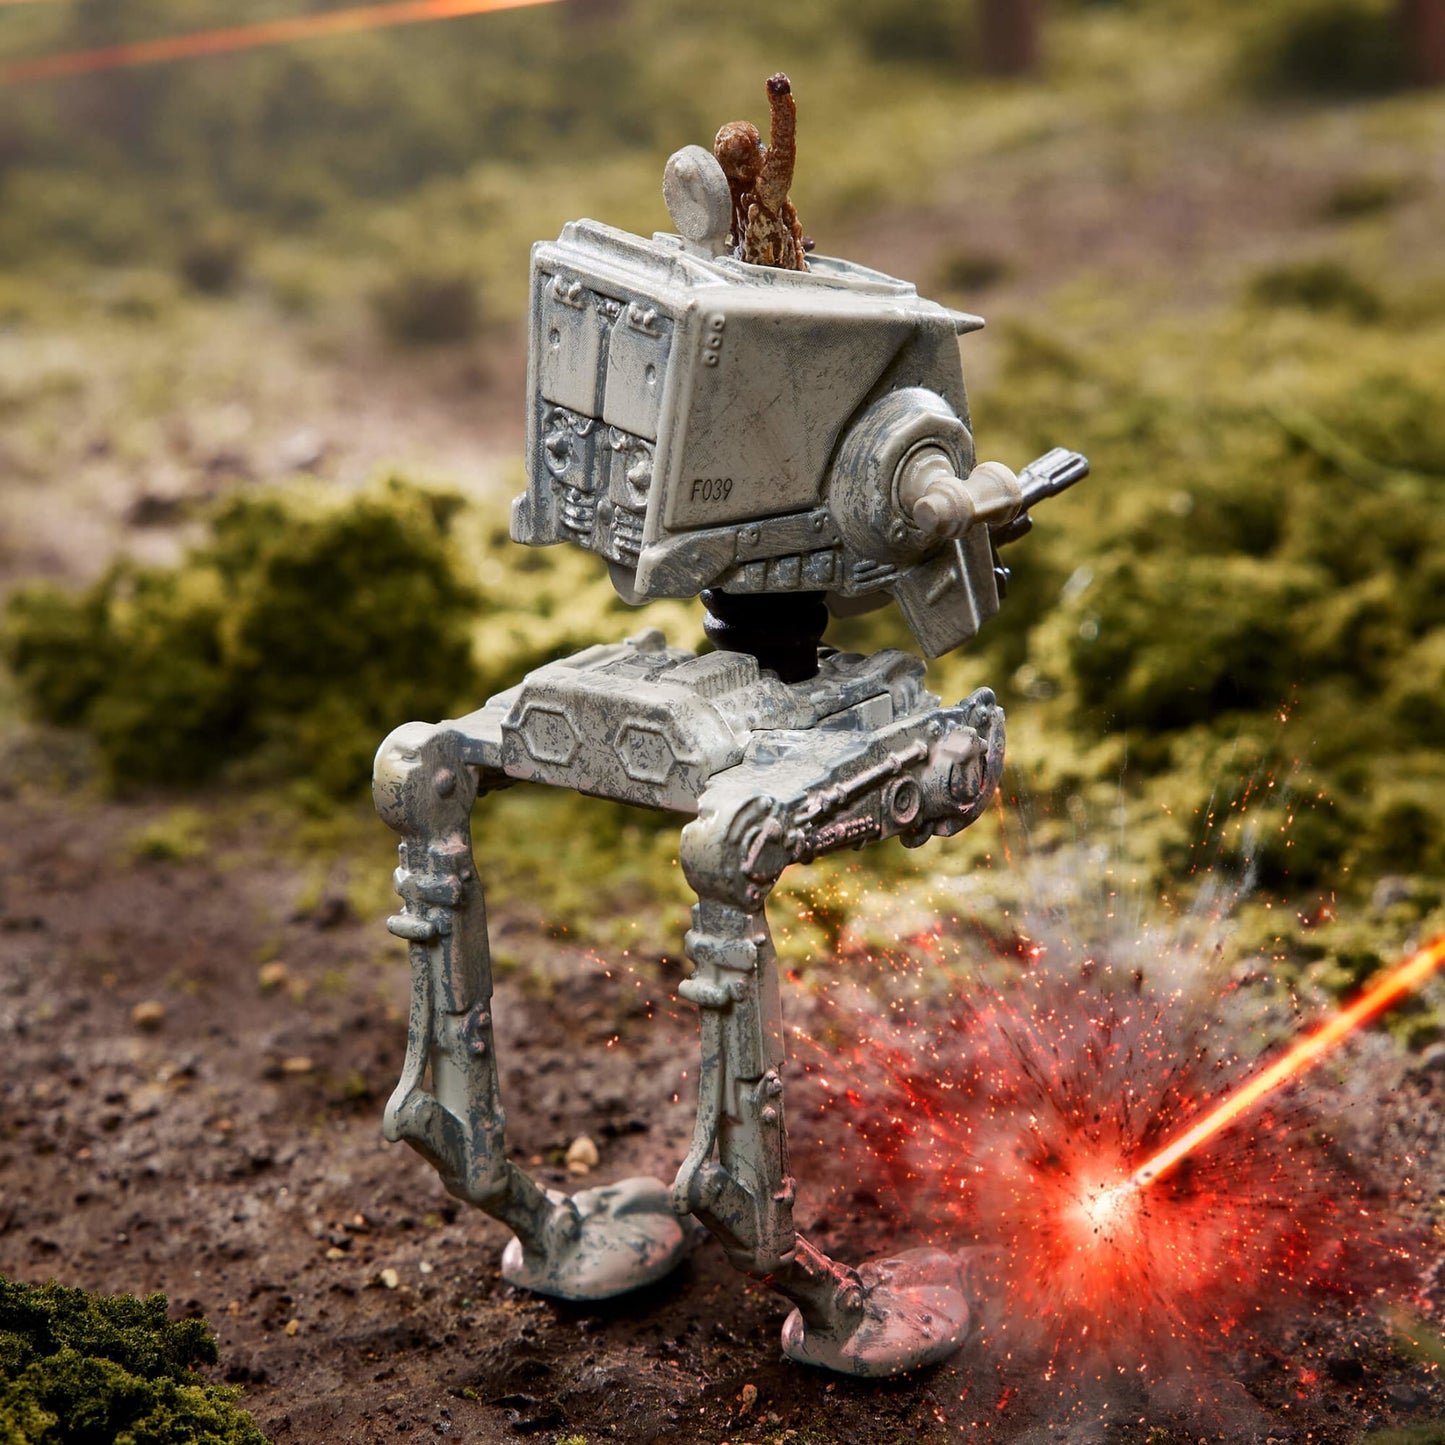 Chewbacca on AT-ST - Hot Wheels